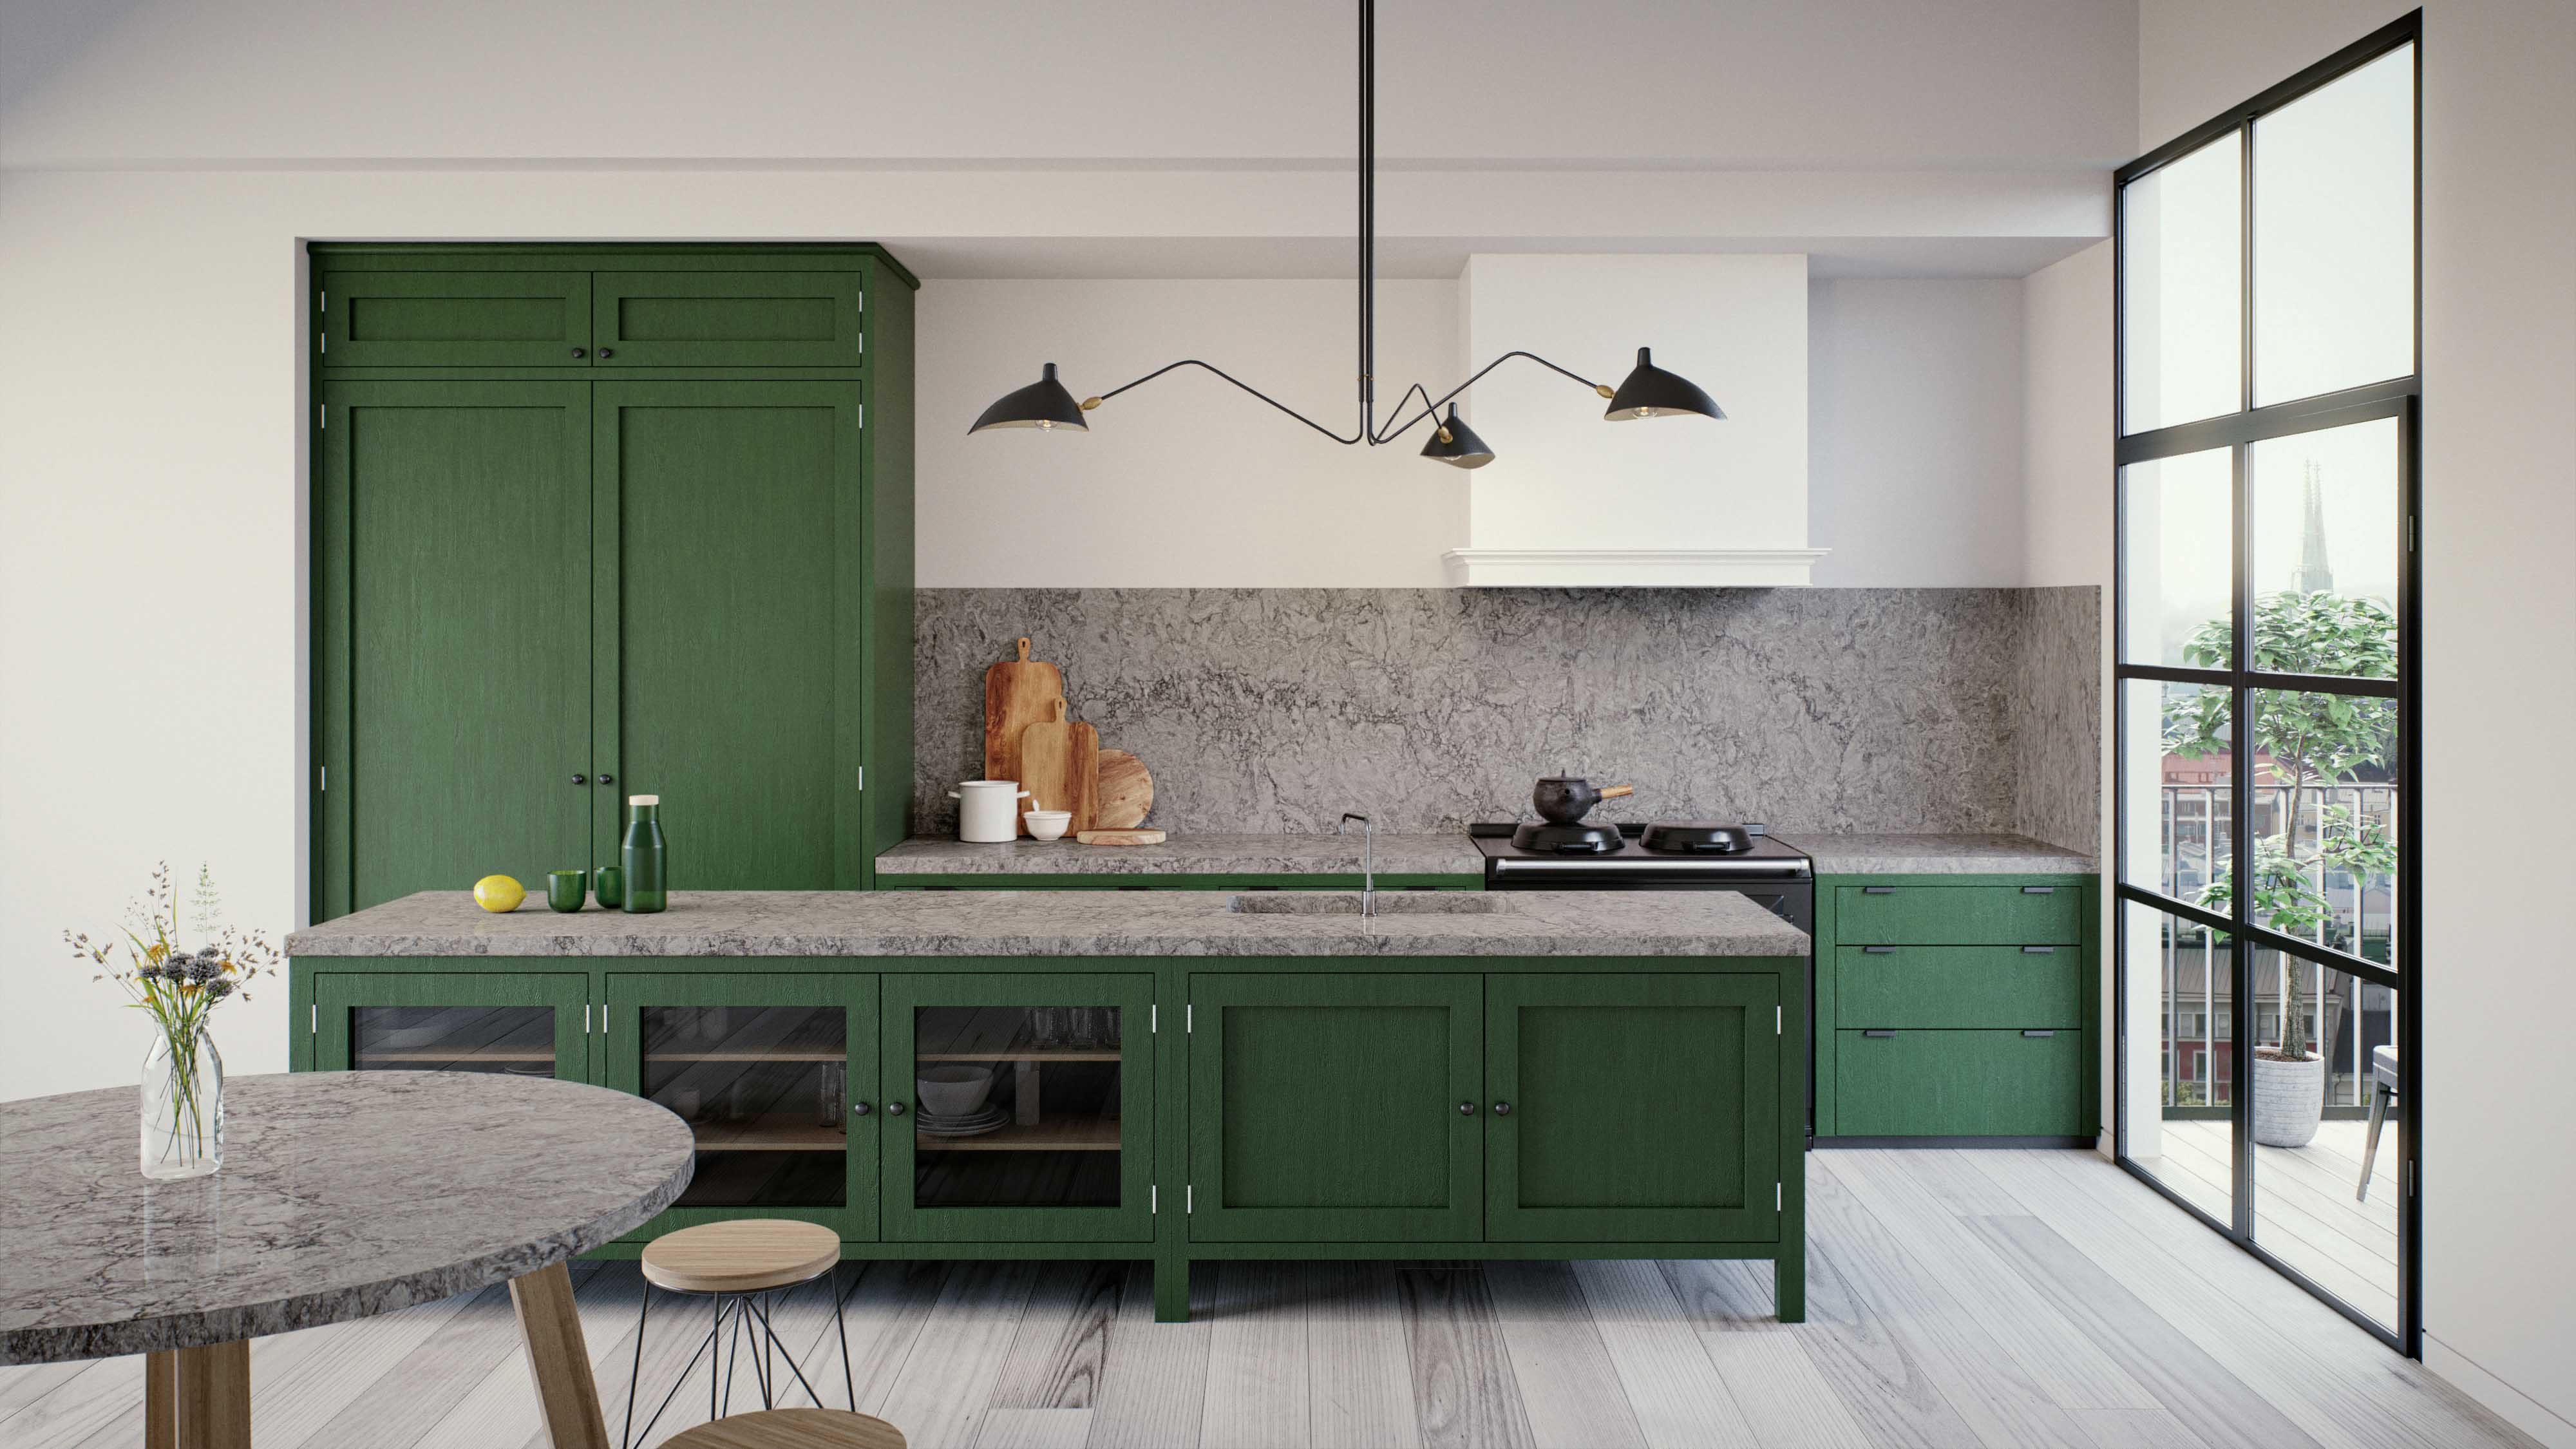 A personal touch: Introducing style and character to your kitchen design